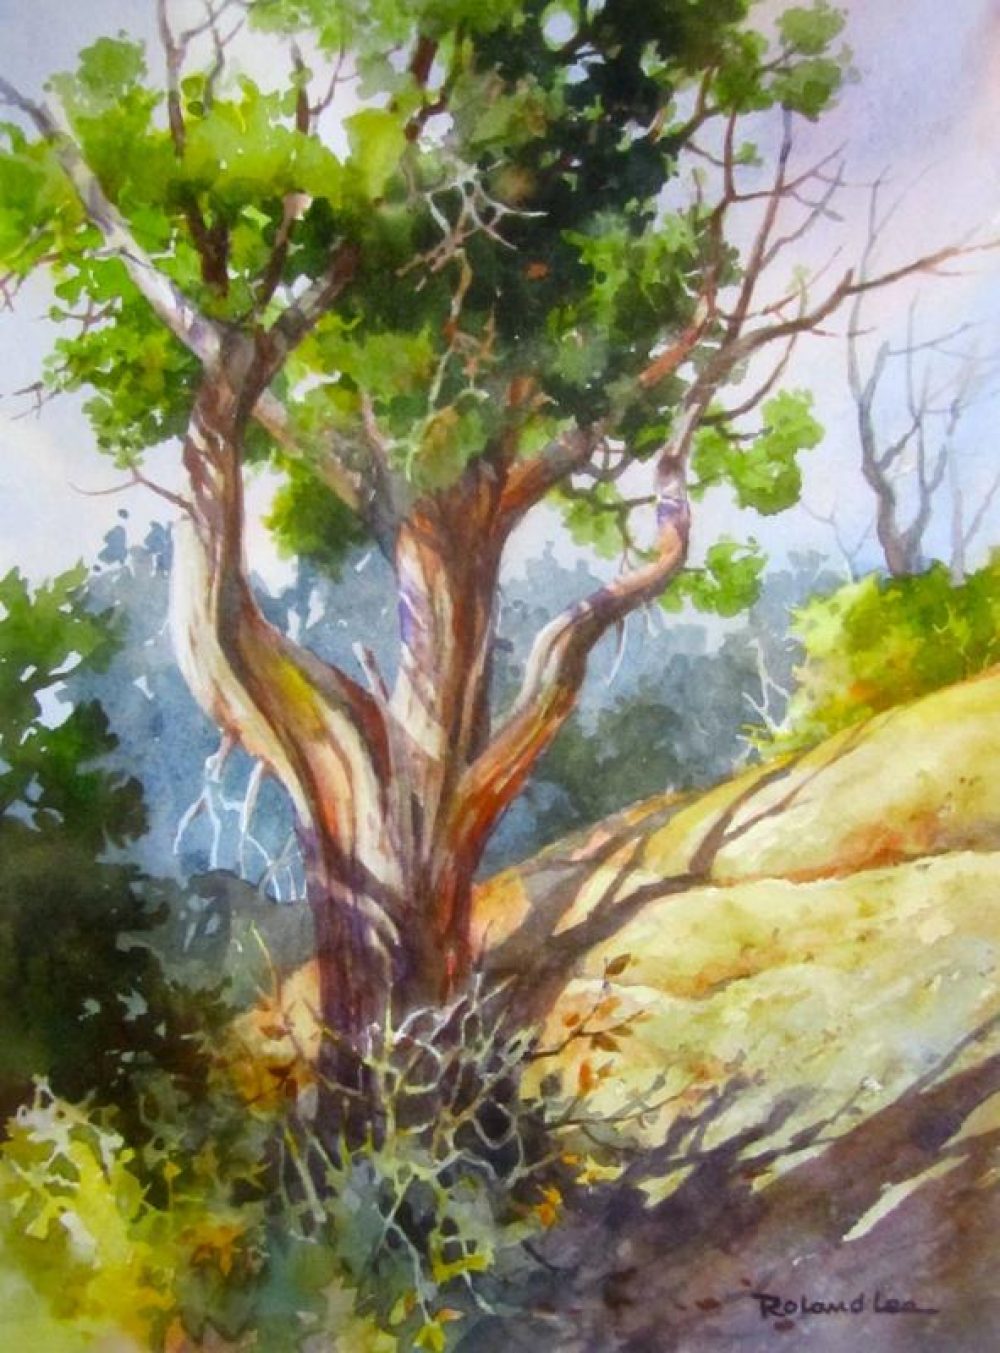 One of the Ancients - Painting of Mesa Verde National Park Juniper Tree